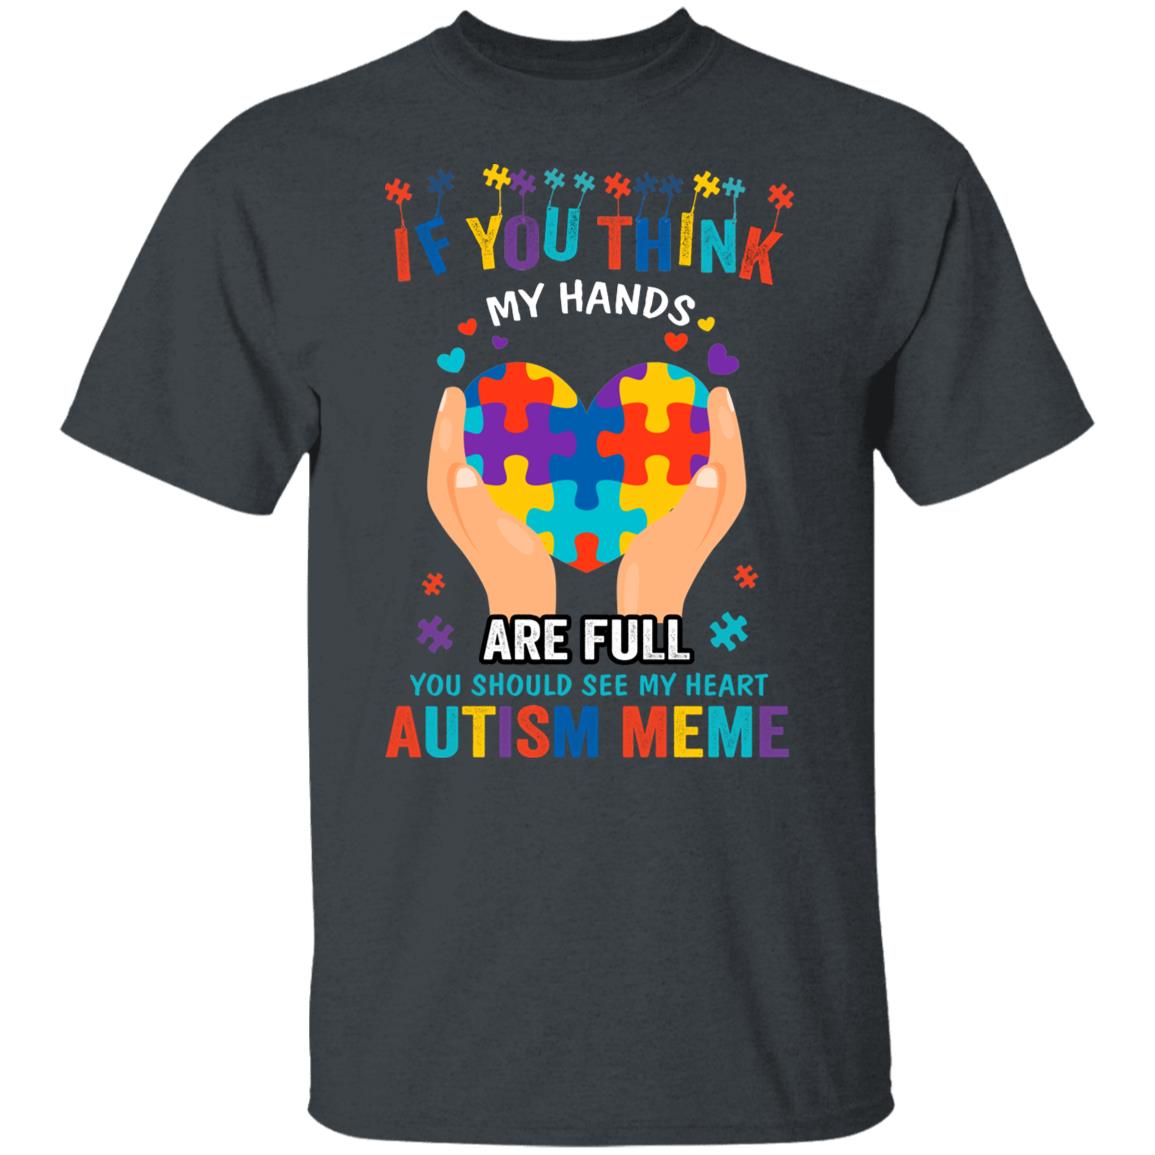 If you think my hands are full you should see my heart autism meme Tshirt